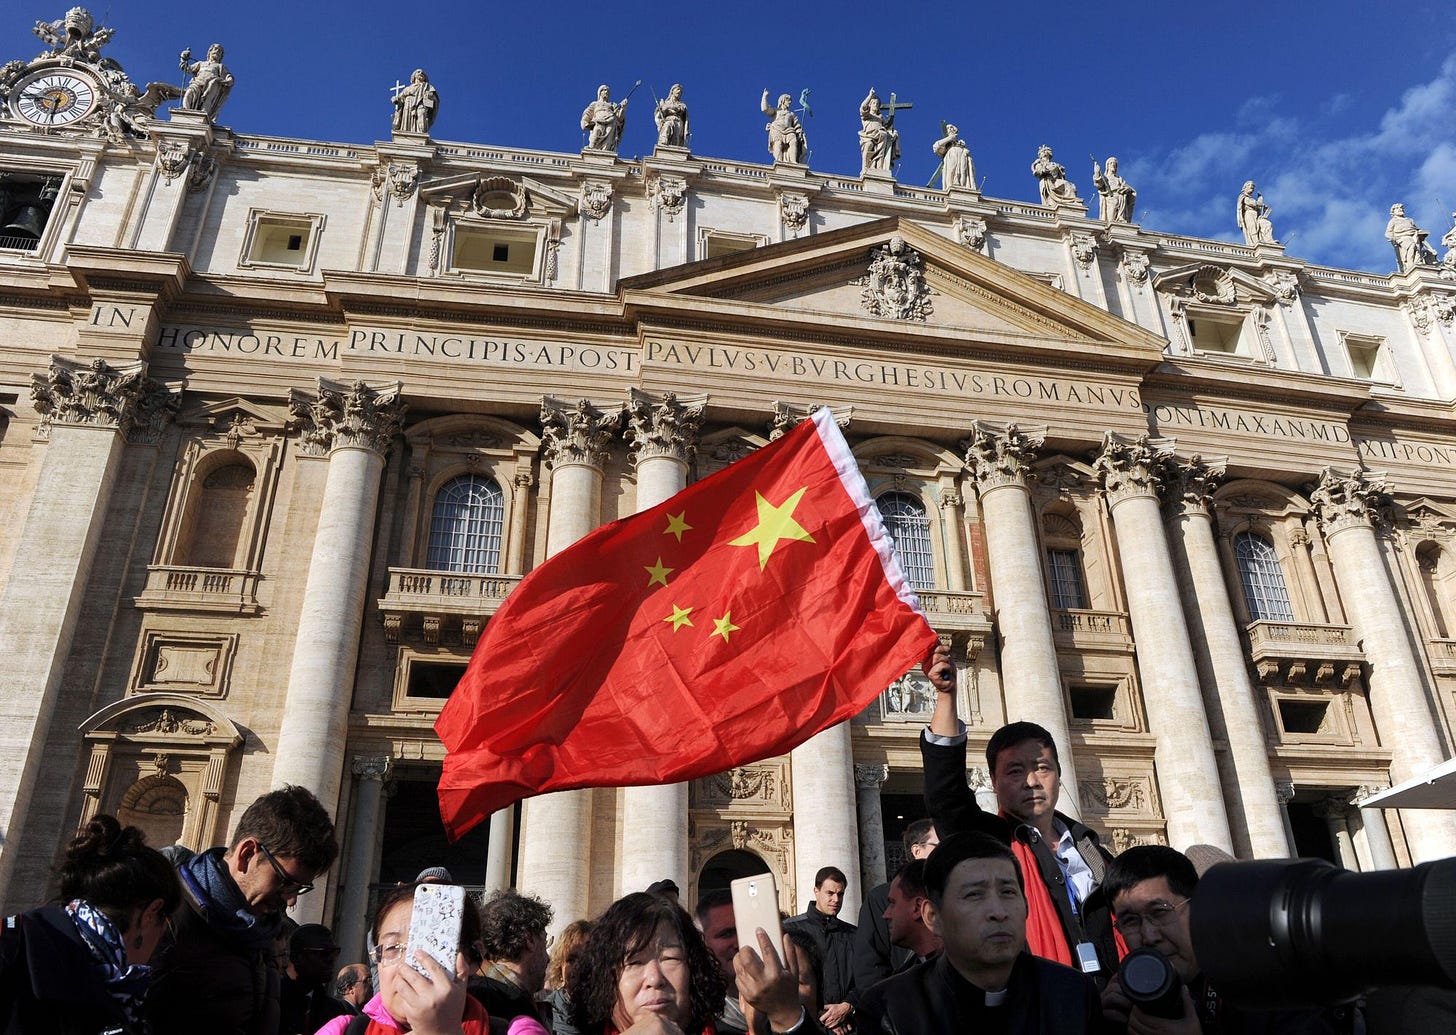 Is the Vatican’s China ‘progress’ going backwards?